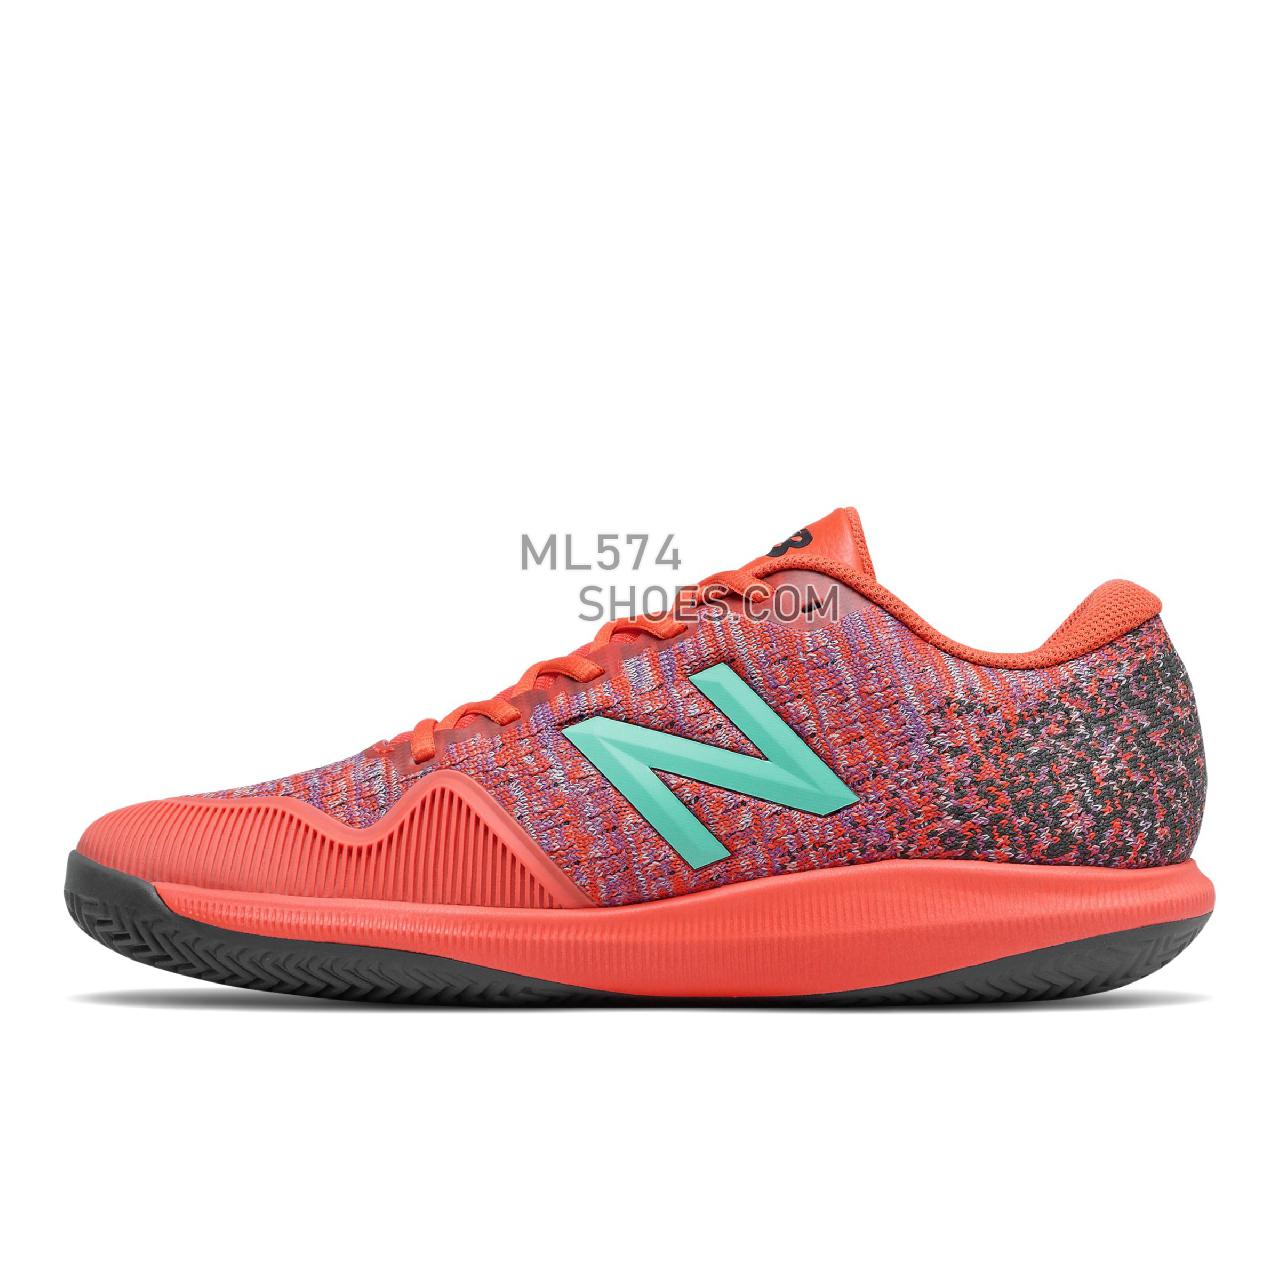 New Balance Clay Court Fuel Cell 996v4 - Men's Tennis - Ghost Pepper with Black Spruce - MCY996G4